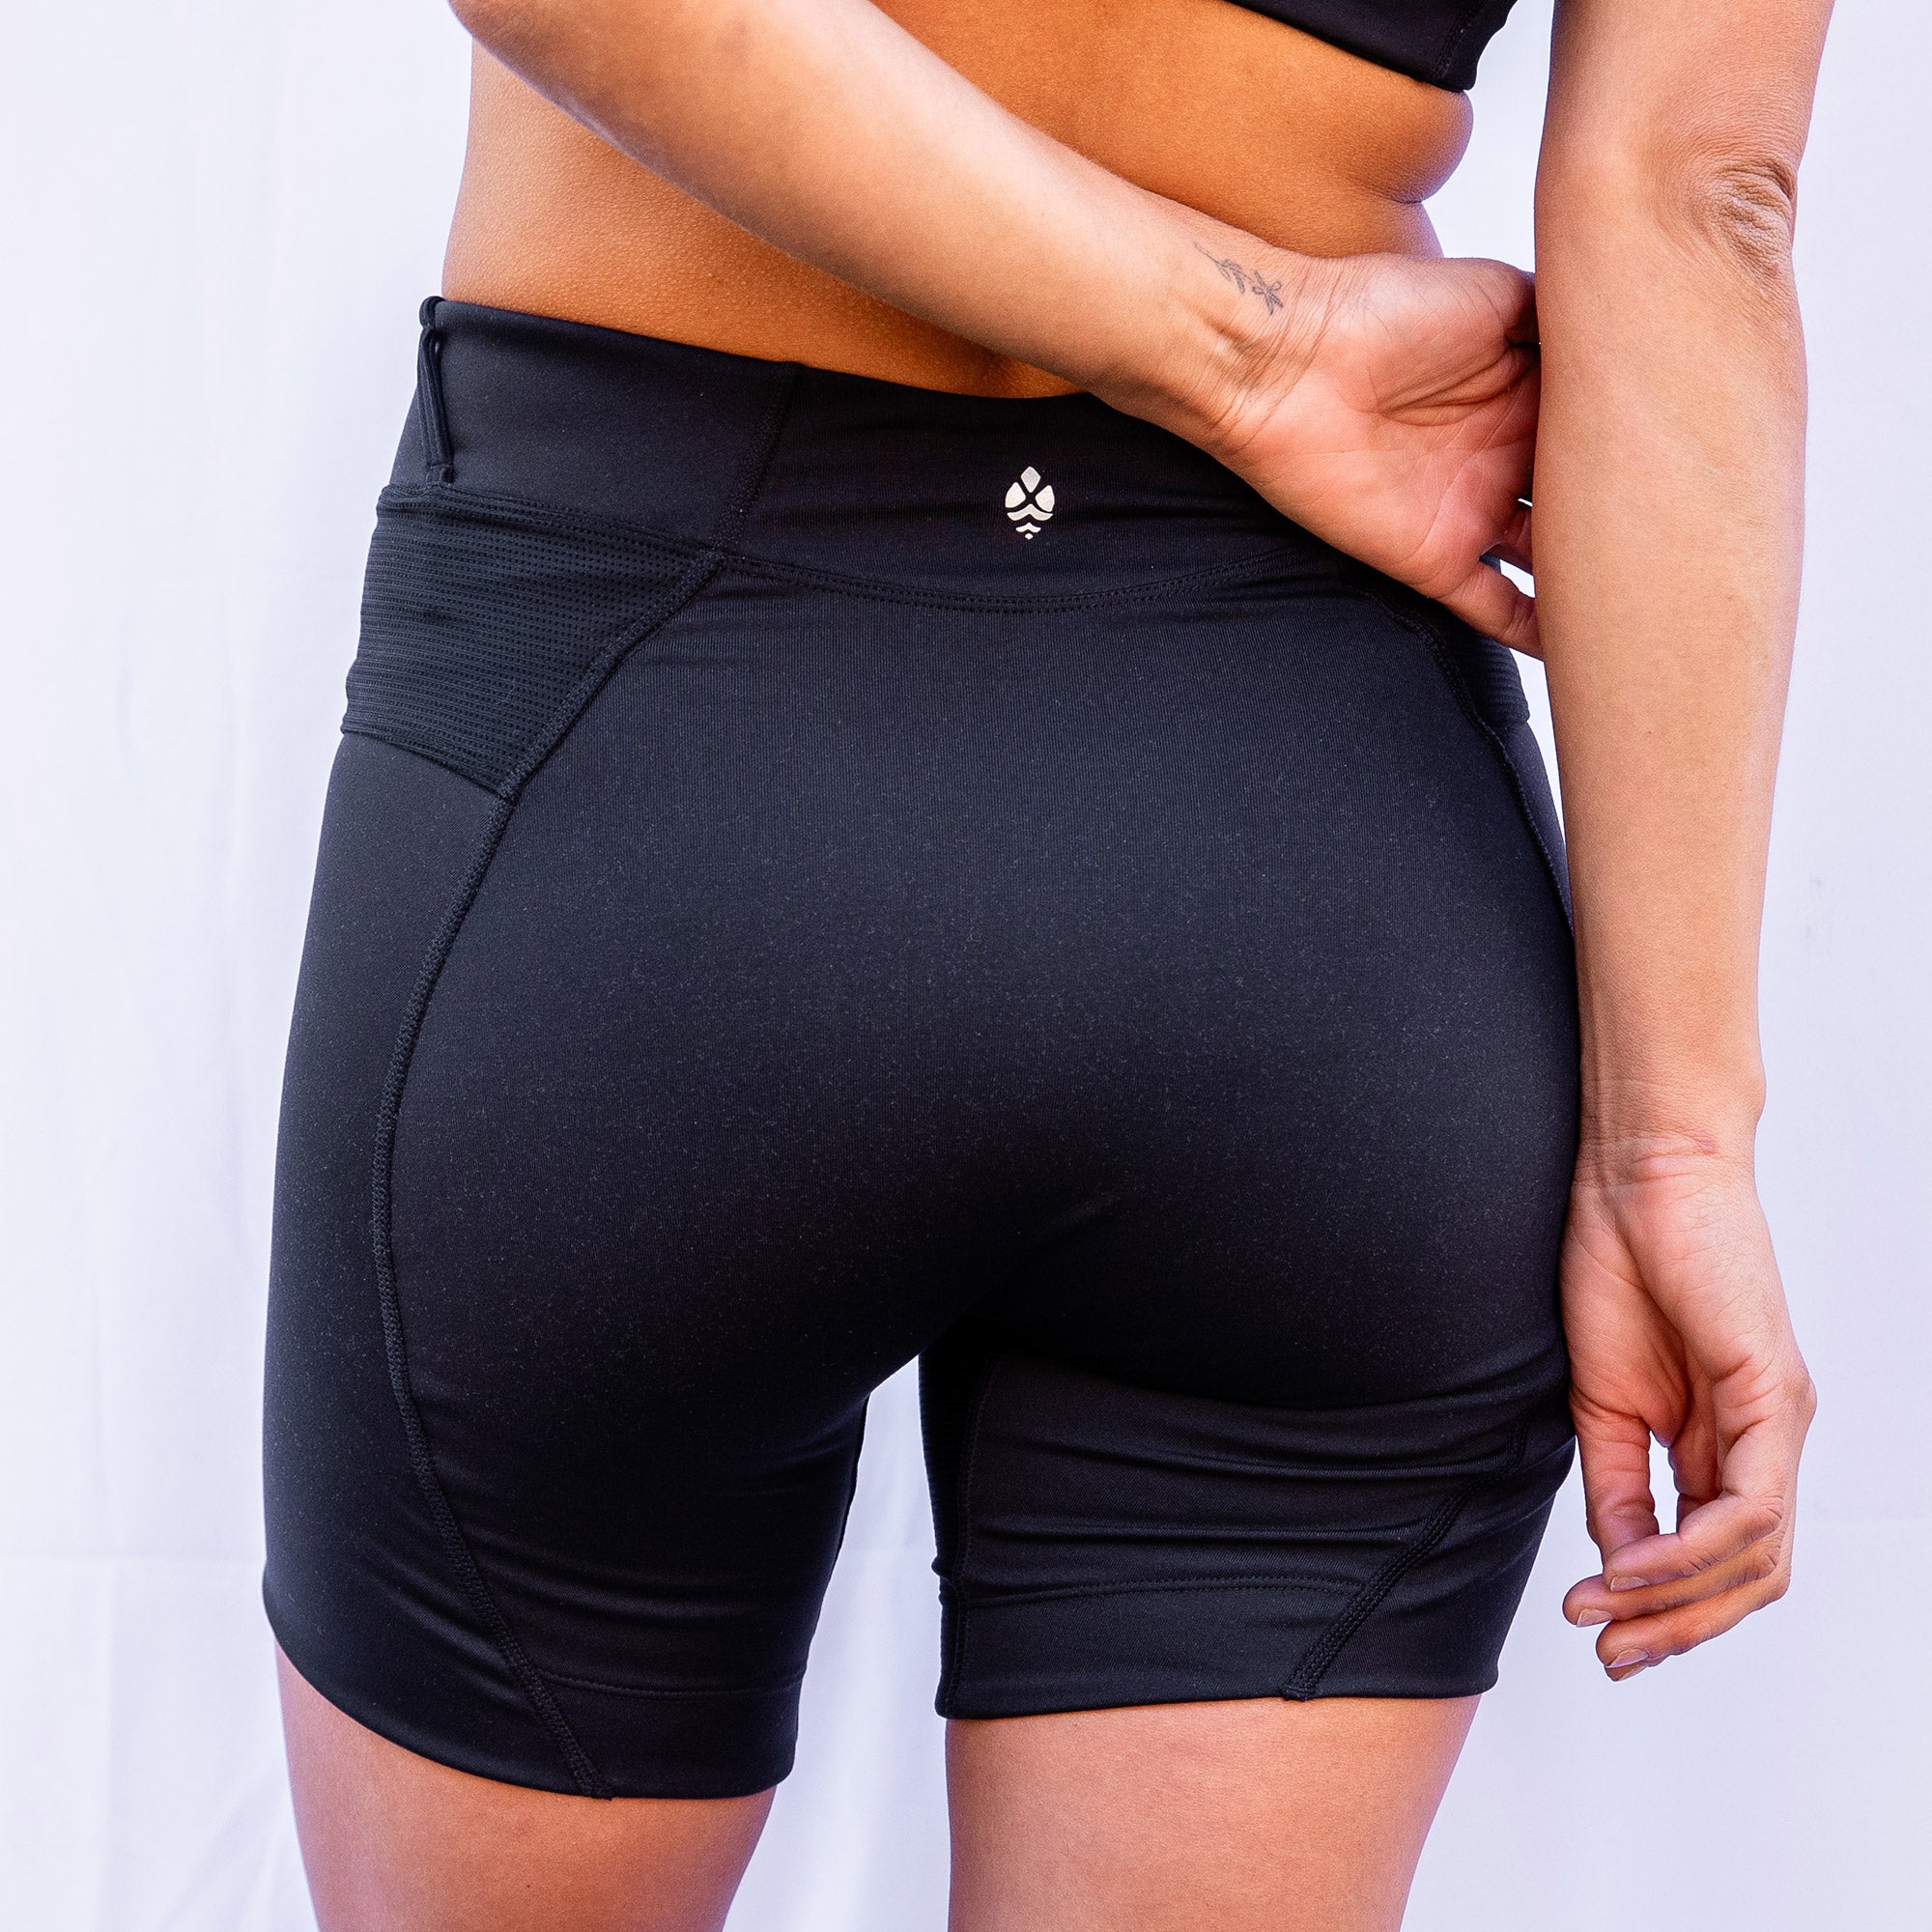 How We Made the Best Hiking Shorts for Women – Tera Kaia